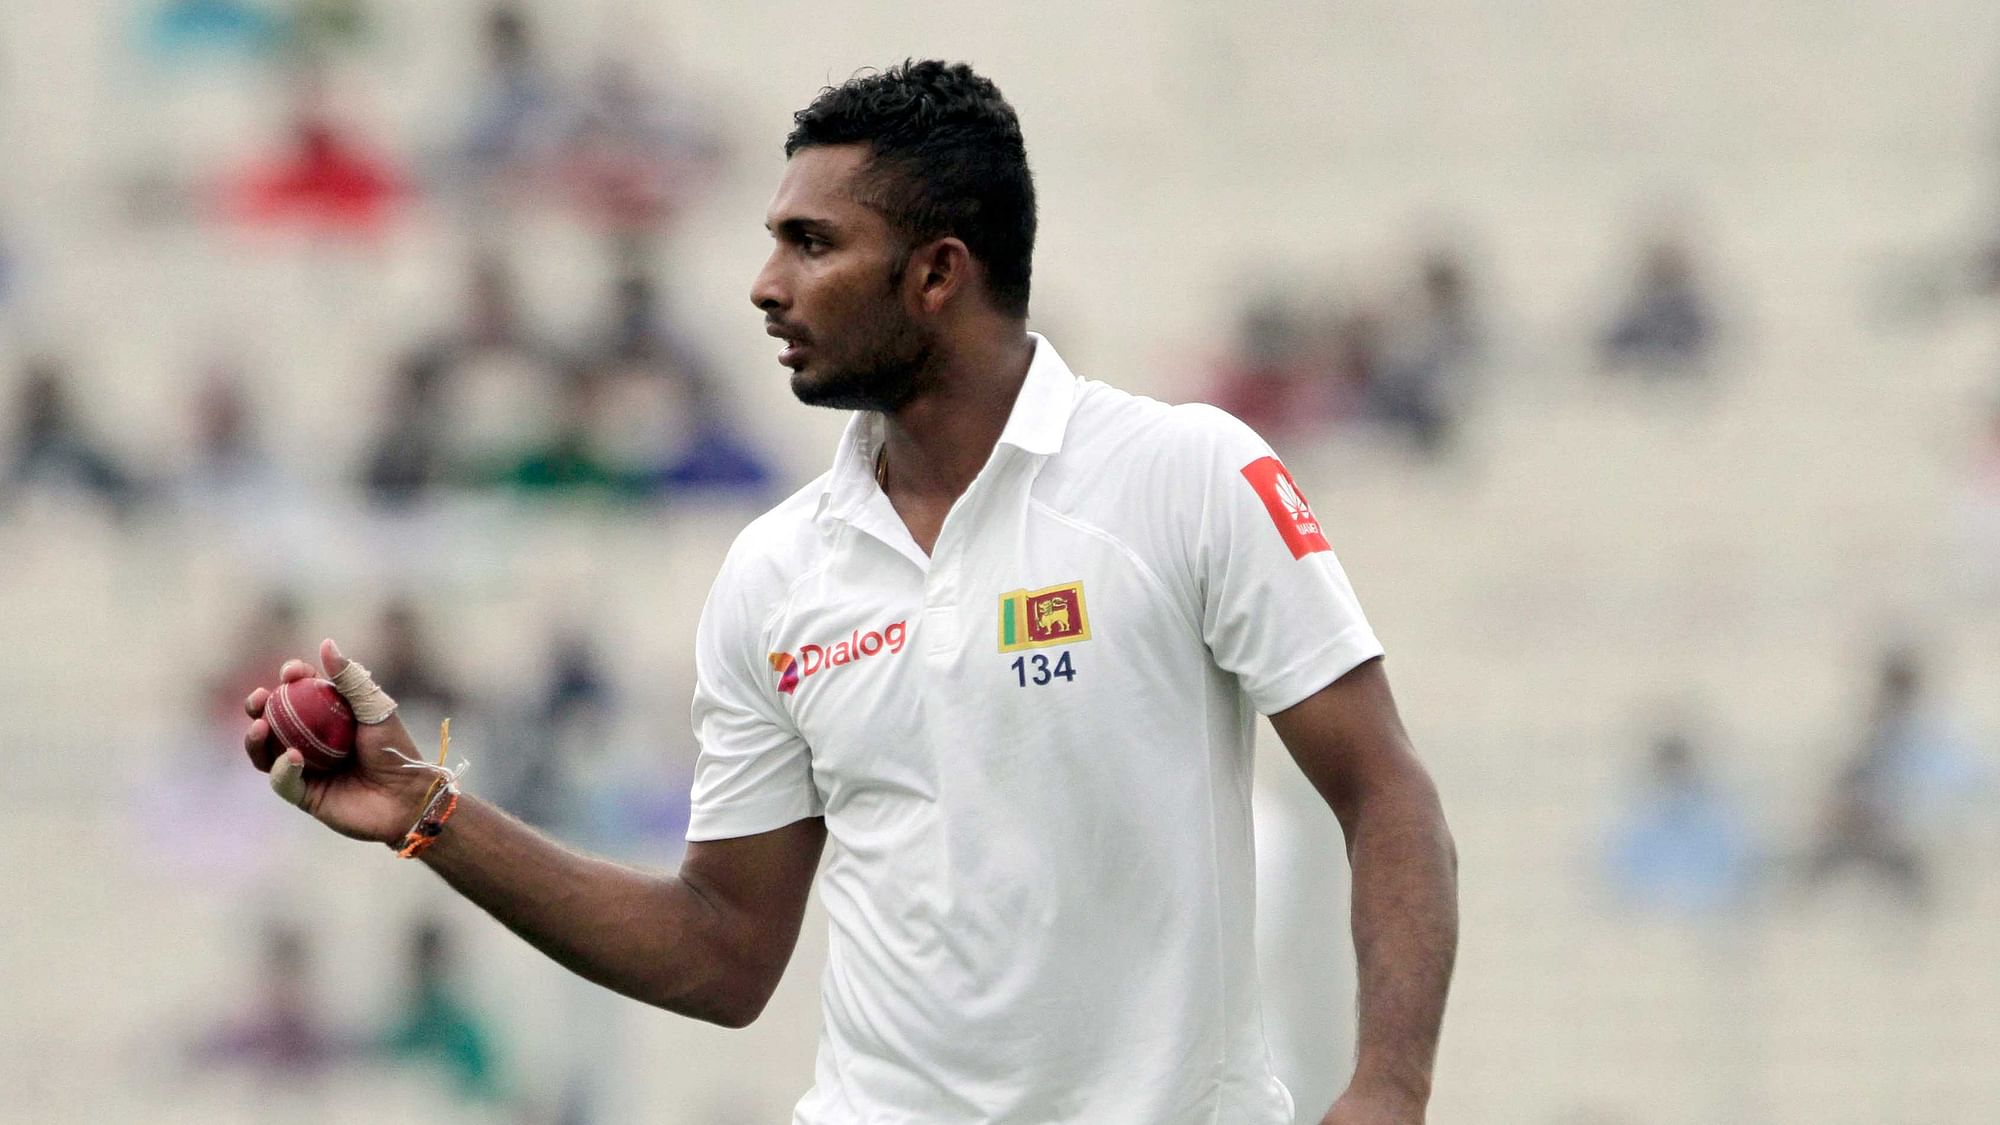 Sri Lanka’s Dasun Shanaka prepares to bowl his next delivery during the second day of their first test cricket match against India in Kolkata